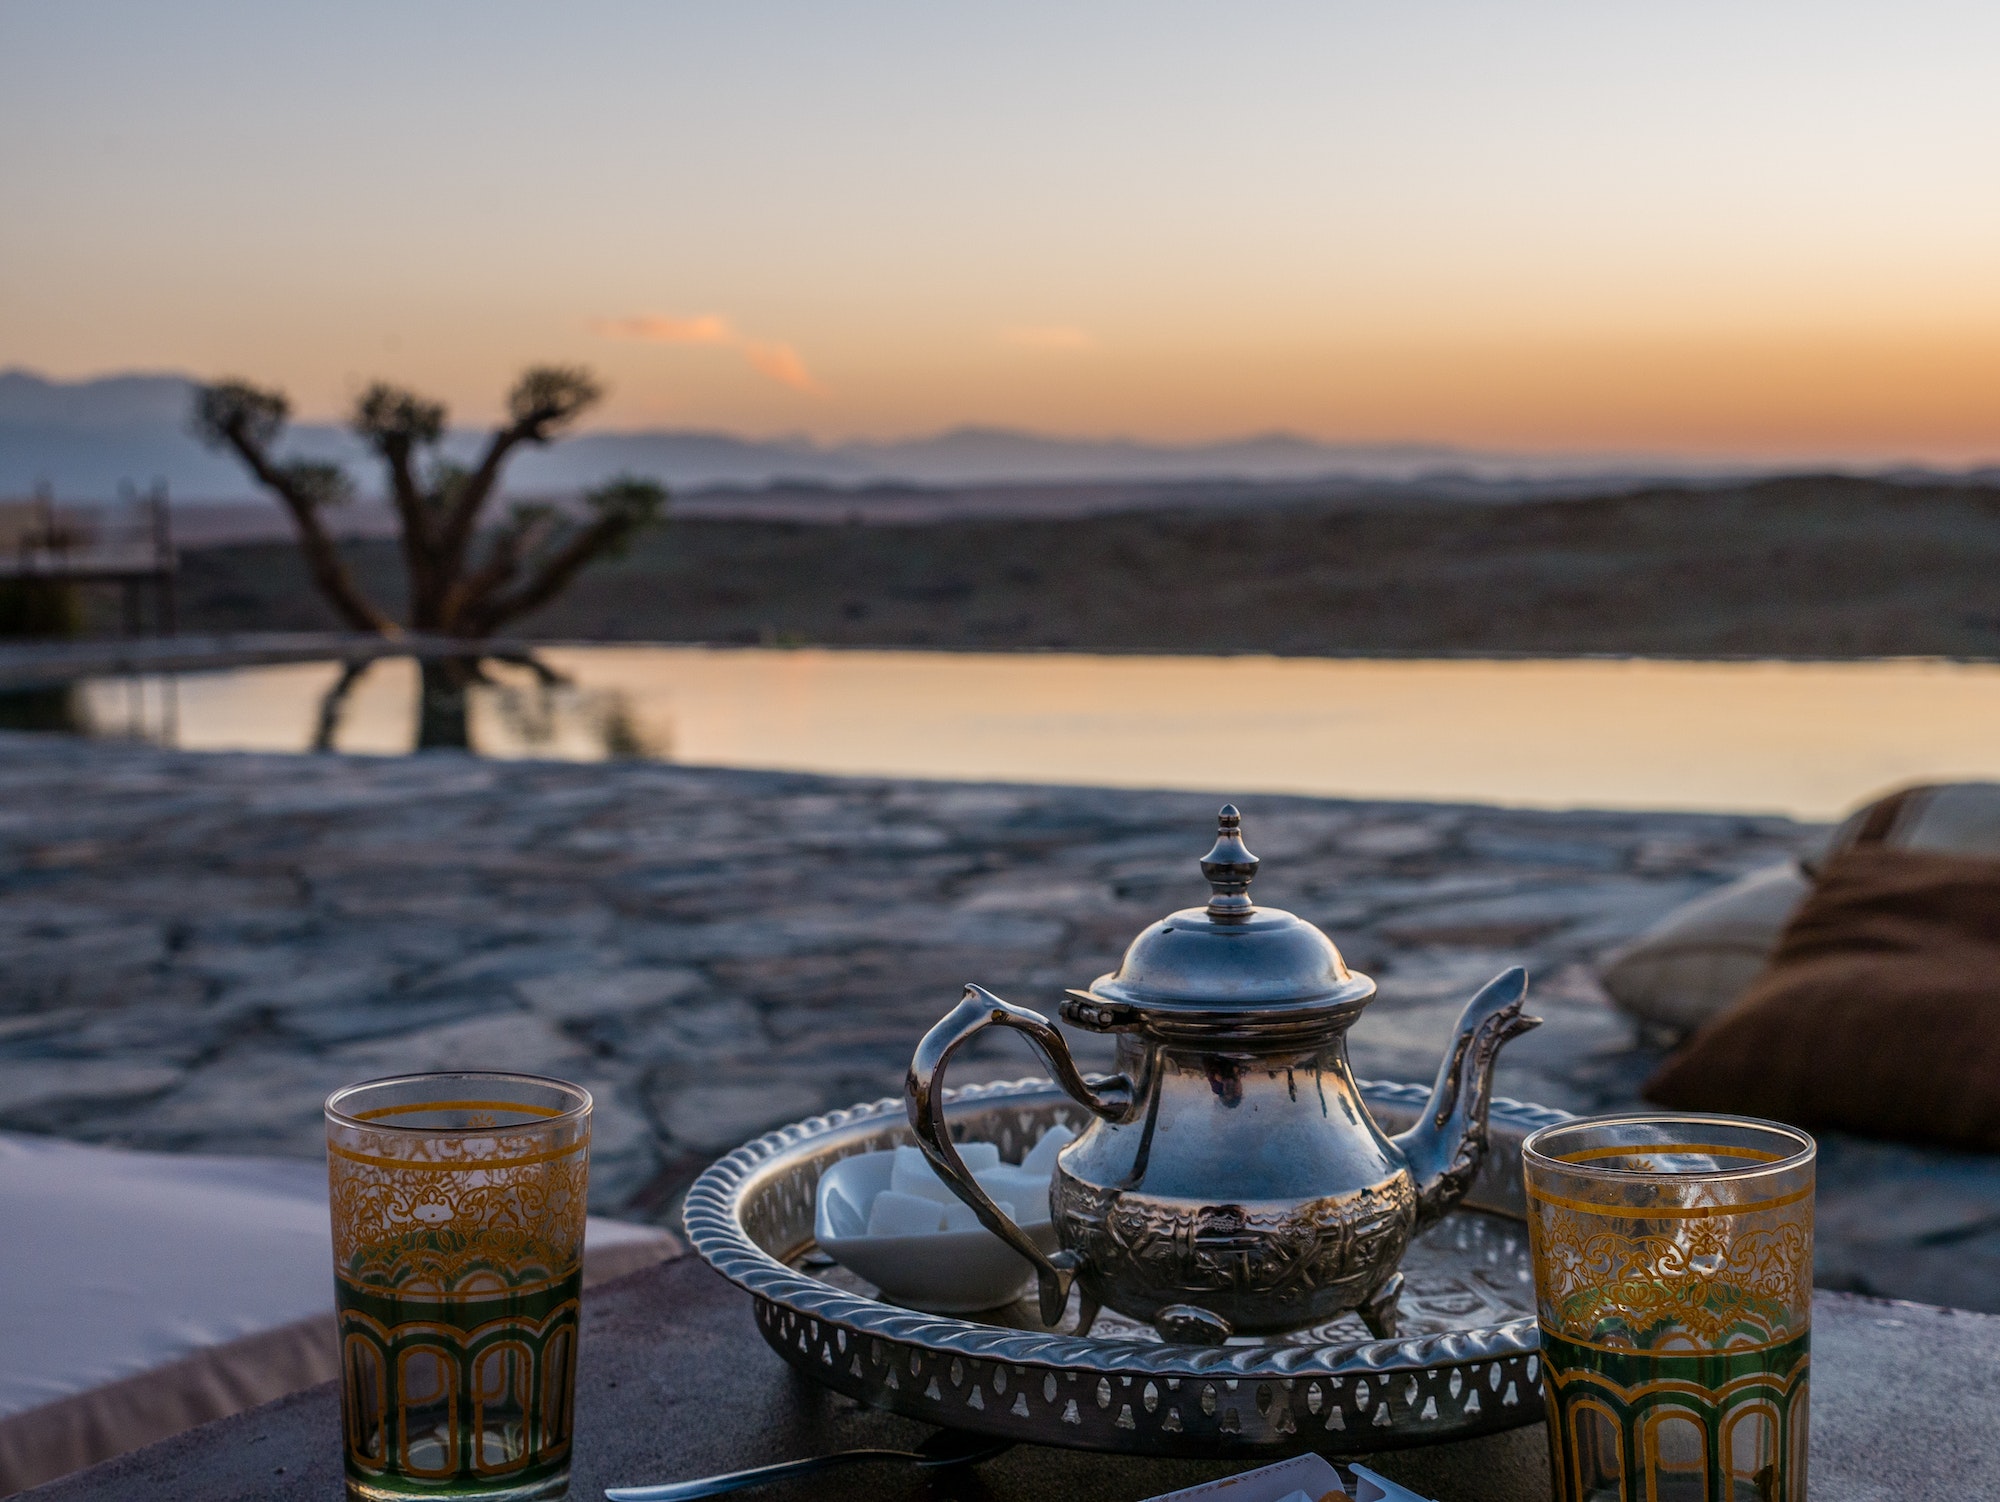 closeup shot of a typical Moroccan mint tea set on the table in Agafay desert, Marrakech